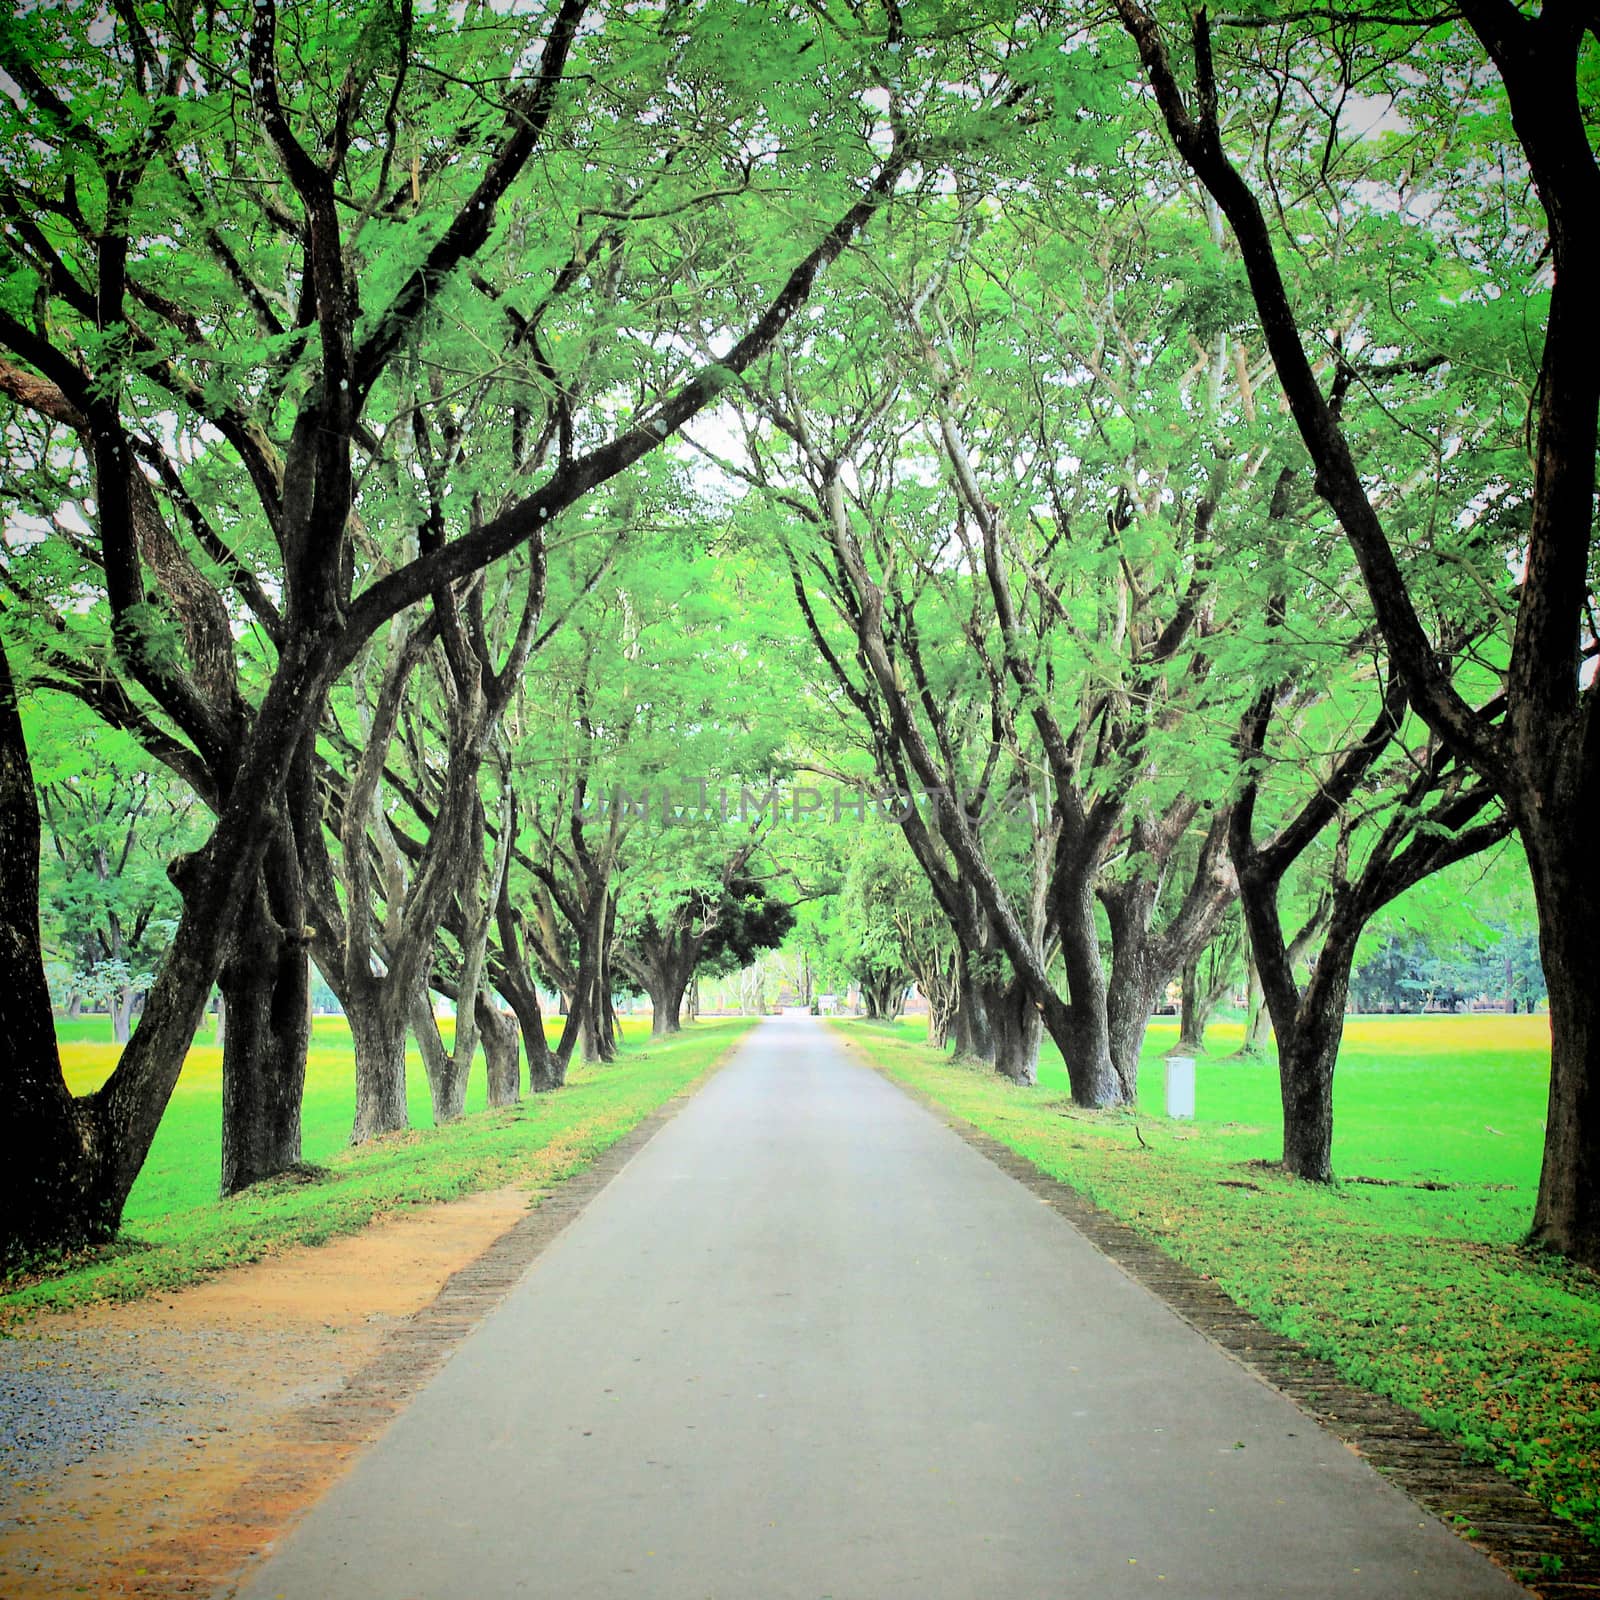 Road through row of green trees wtih retro filter effect